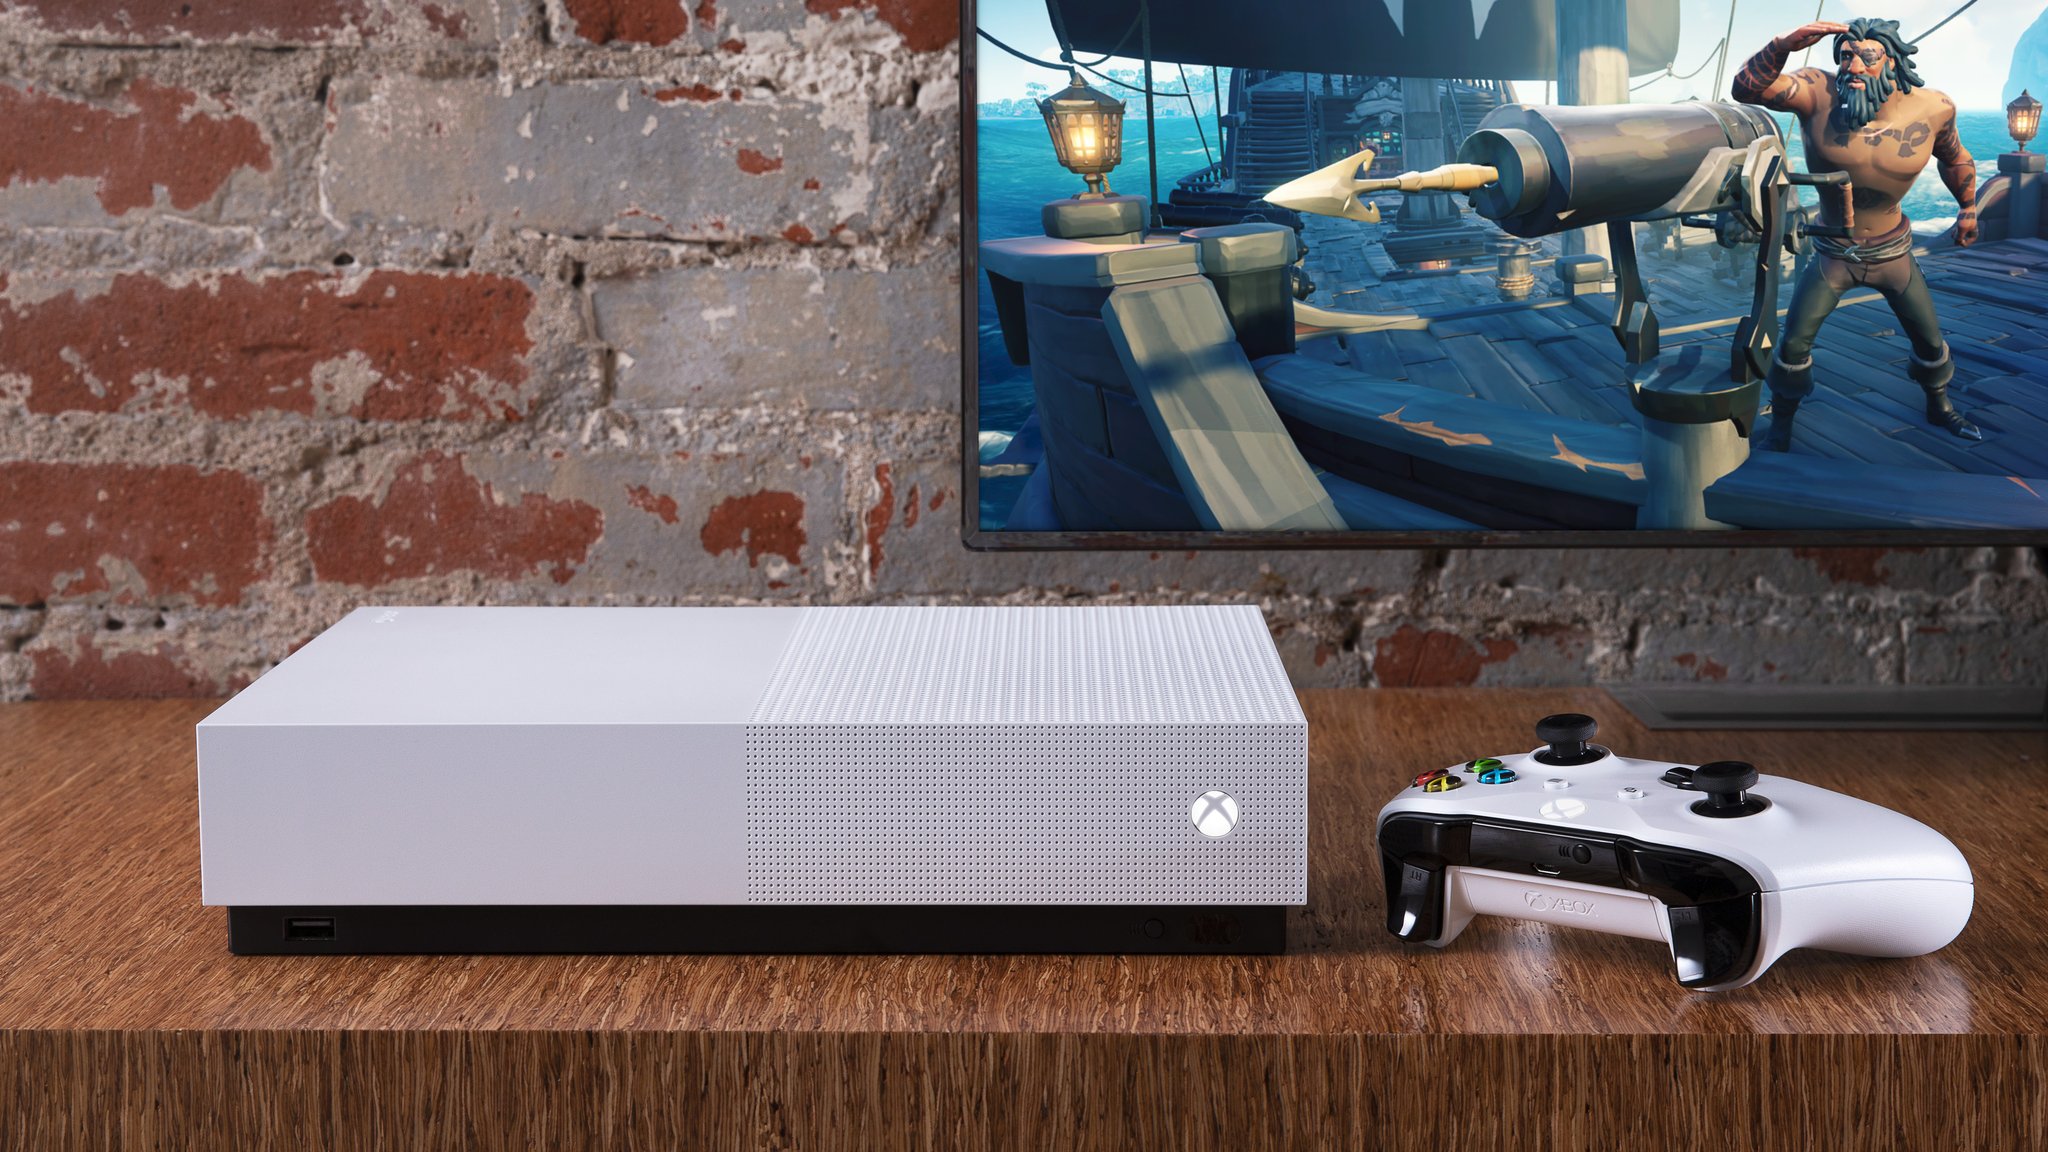 xbox one s digital review